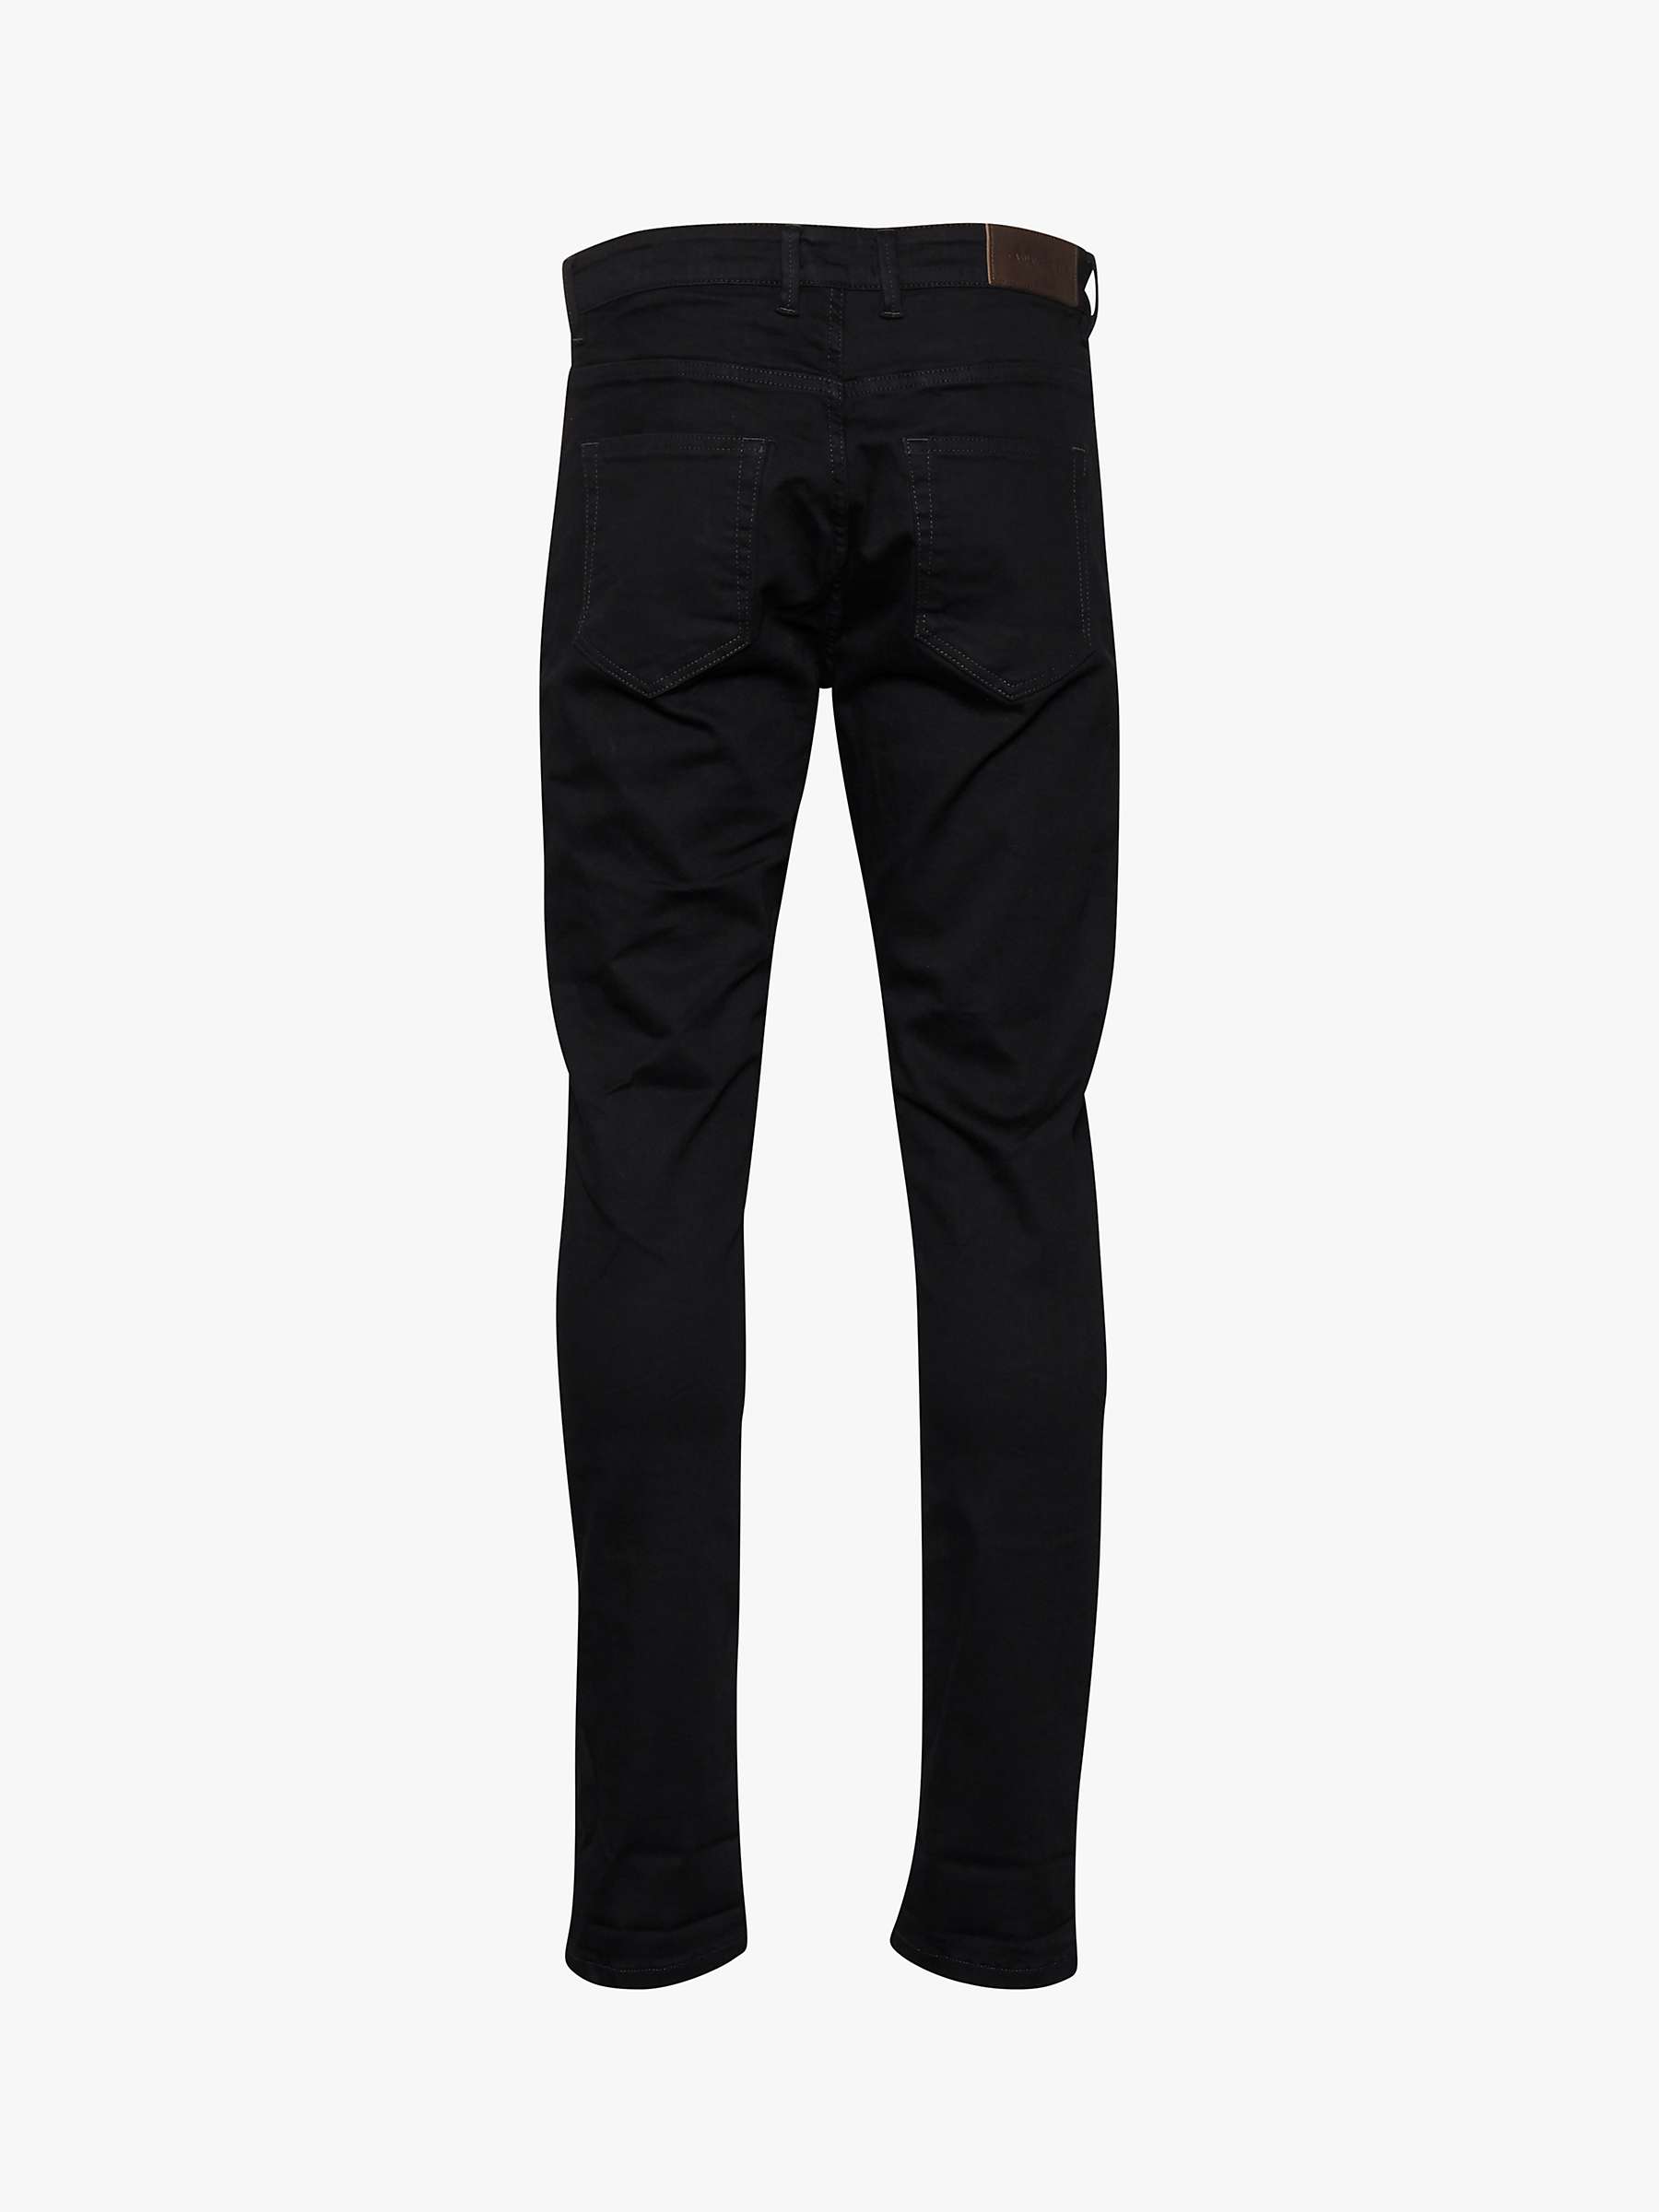 Buy Casual Friday Ry Slim Fit Ultraflex Jeans, Black Online at johnlewis.com